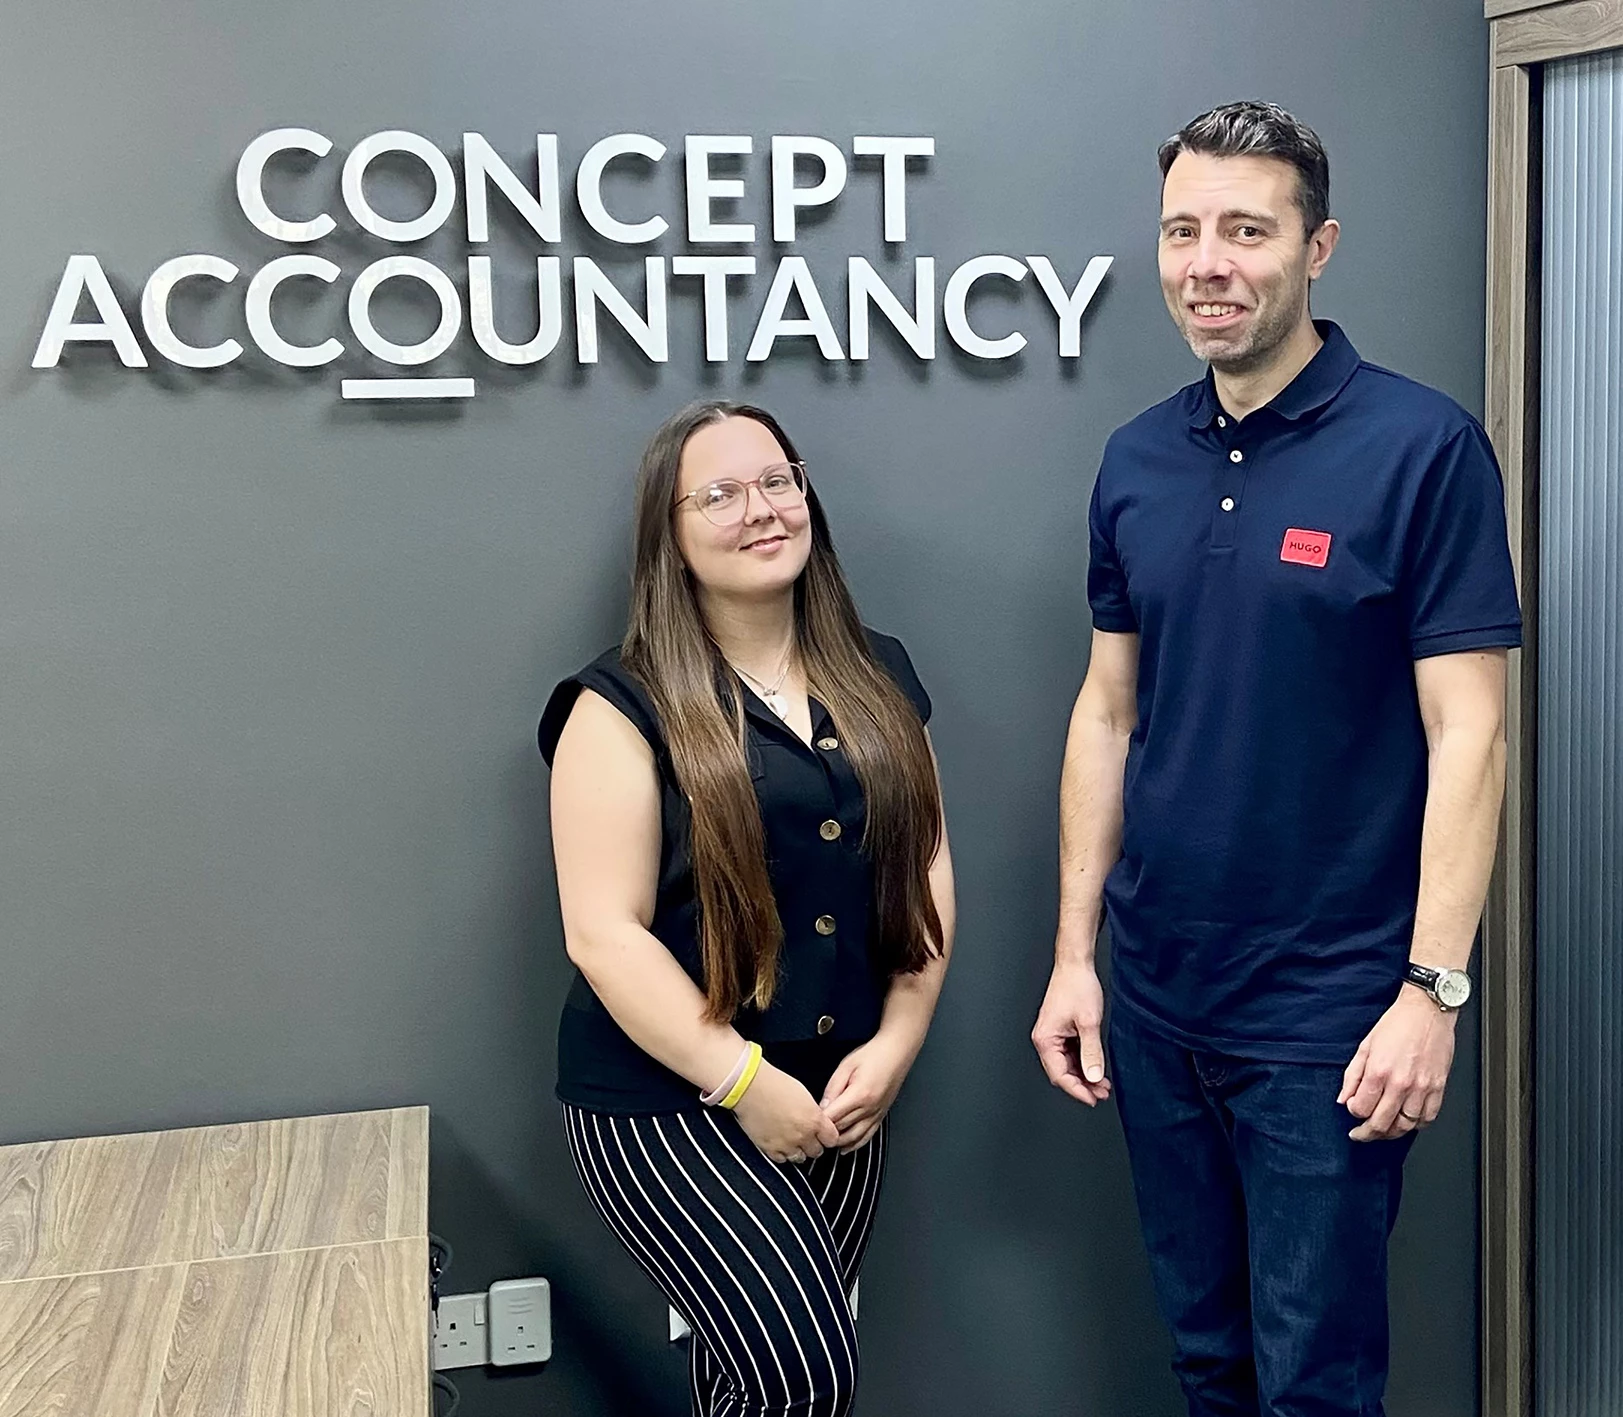 Chelsea Harvey is welcomed to Concept Accountancy by Founder and MD Mark Melville